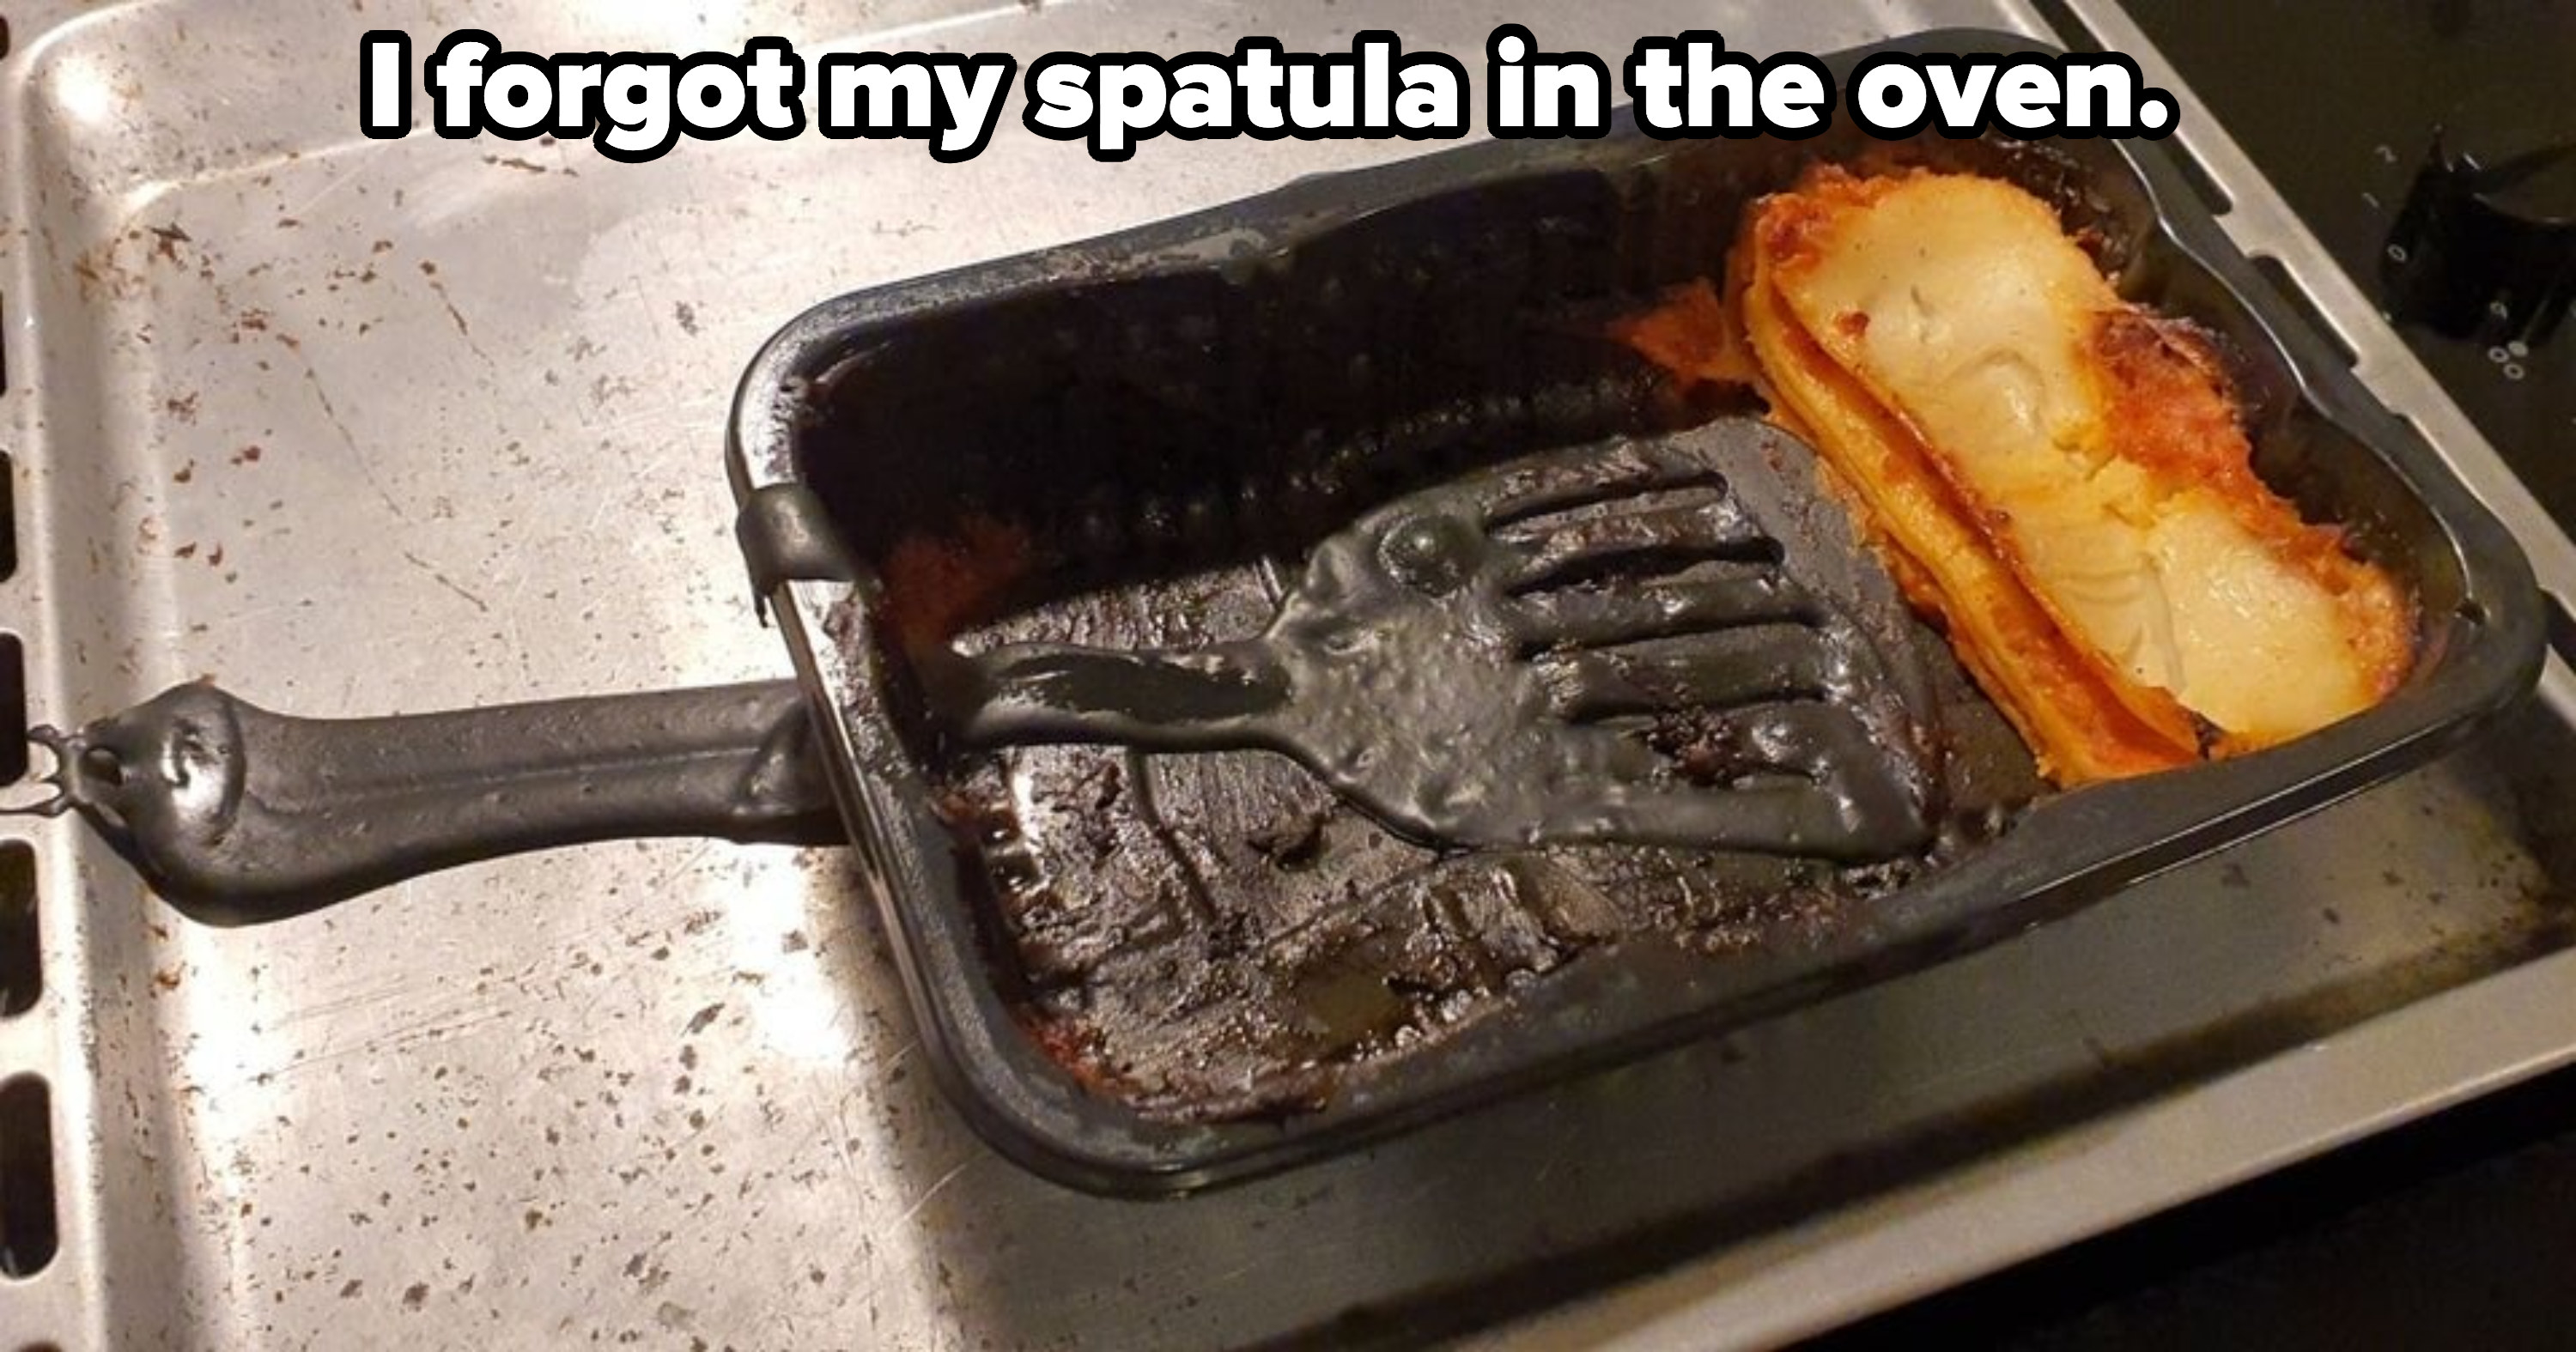 A melted spatula left in the oven